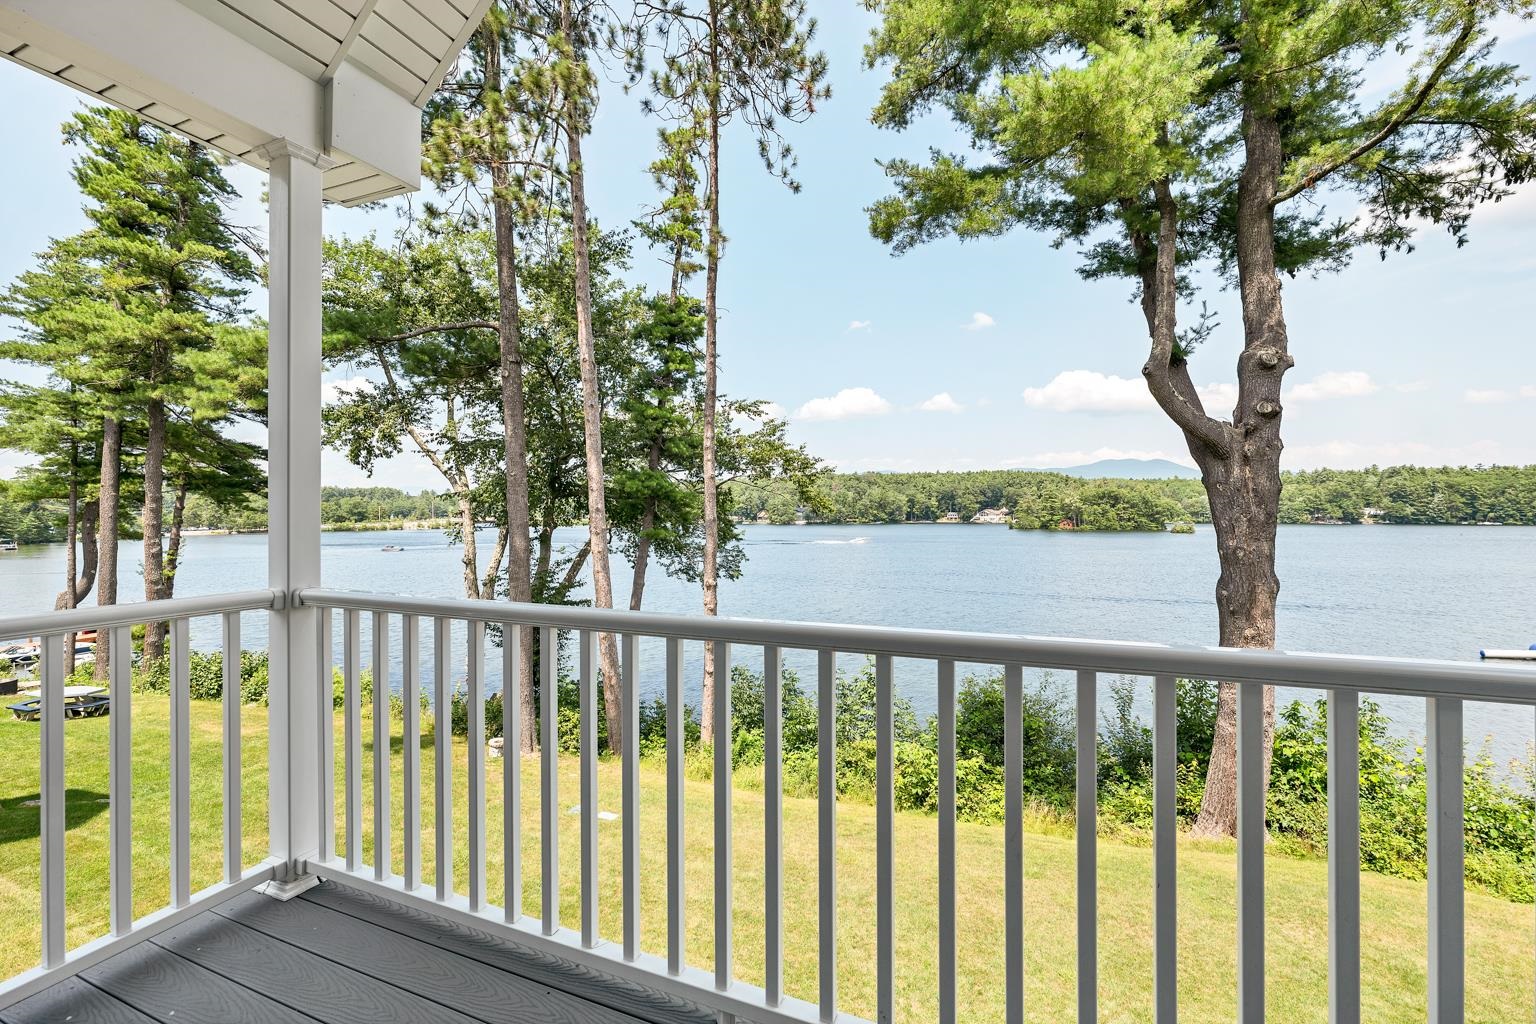 Private lake side balconies off from both ensuite bedrooms. Let your family and friends open the glass sliders and bask in the lake fresh air when they come to visit and stay in this oasis.